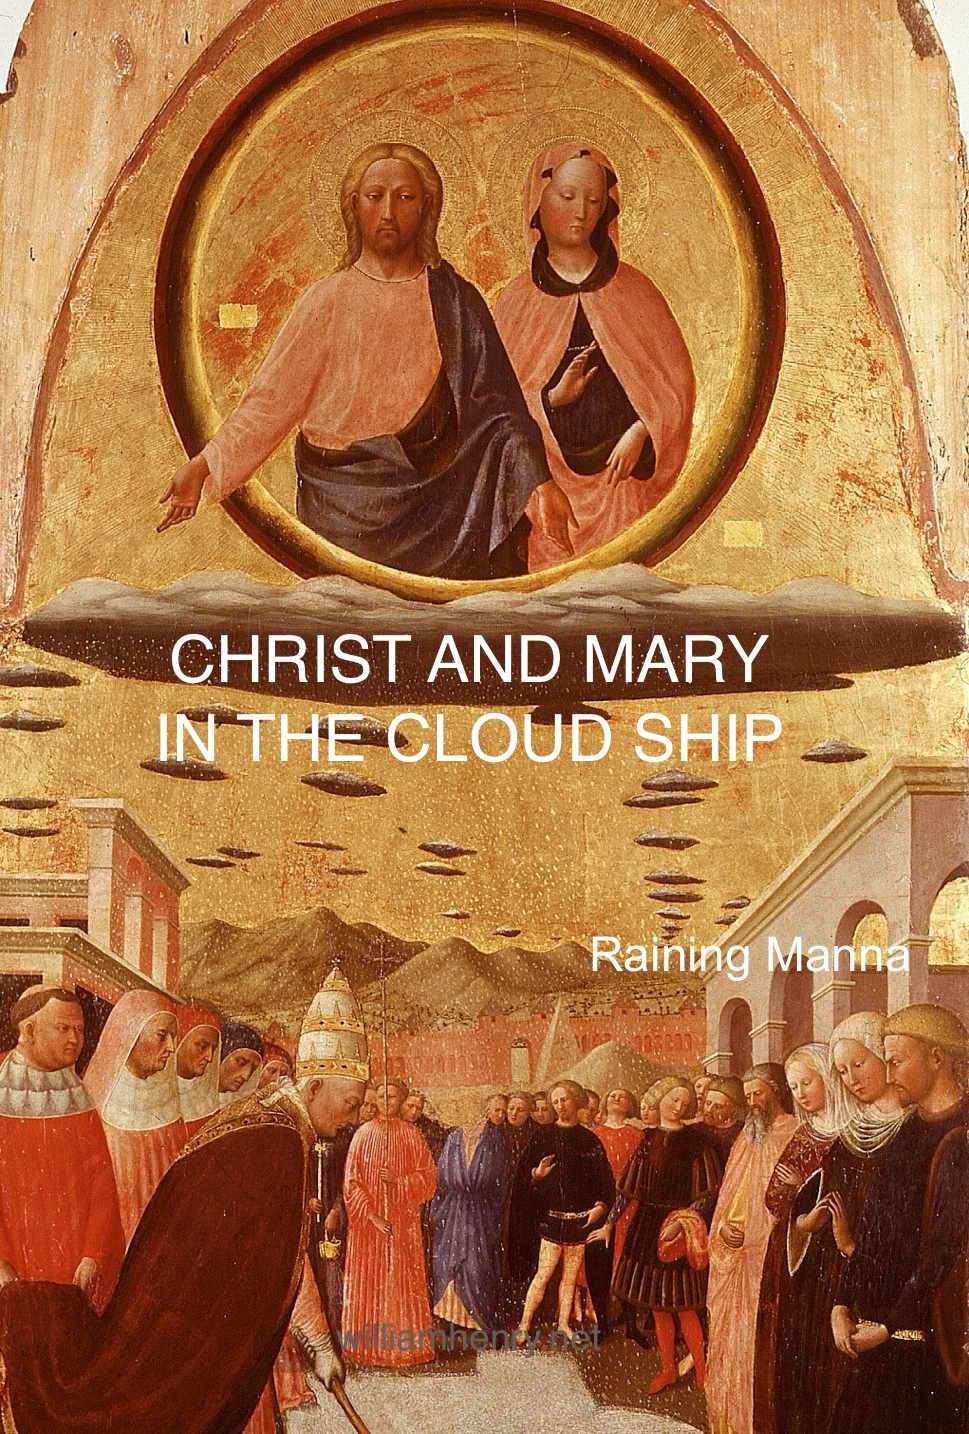 http://www.williamhenry.net/wp-content/uploads/2017/01/CHRIST-AND-MARY-IN-THE-CLOUD-SHIP-WILLIAM-HENRY.jpg